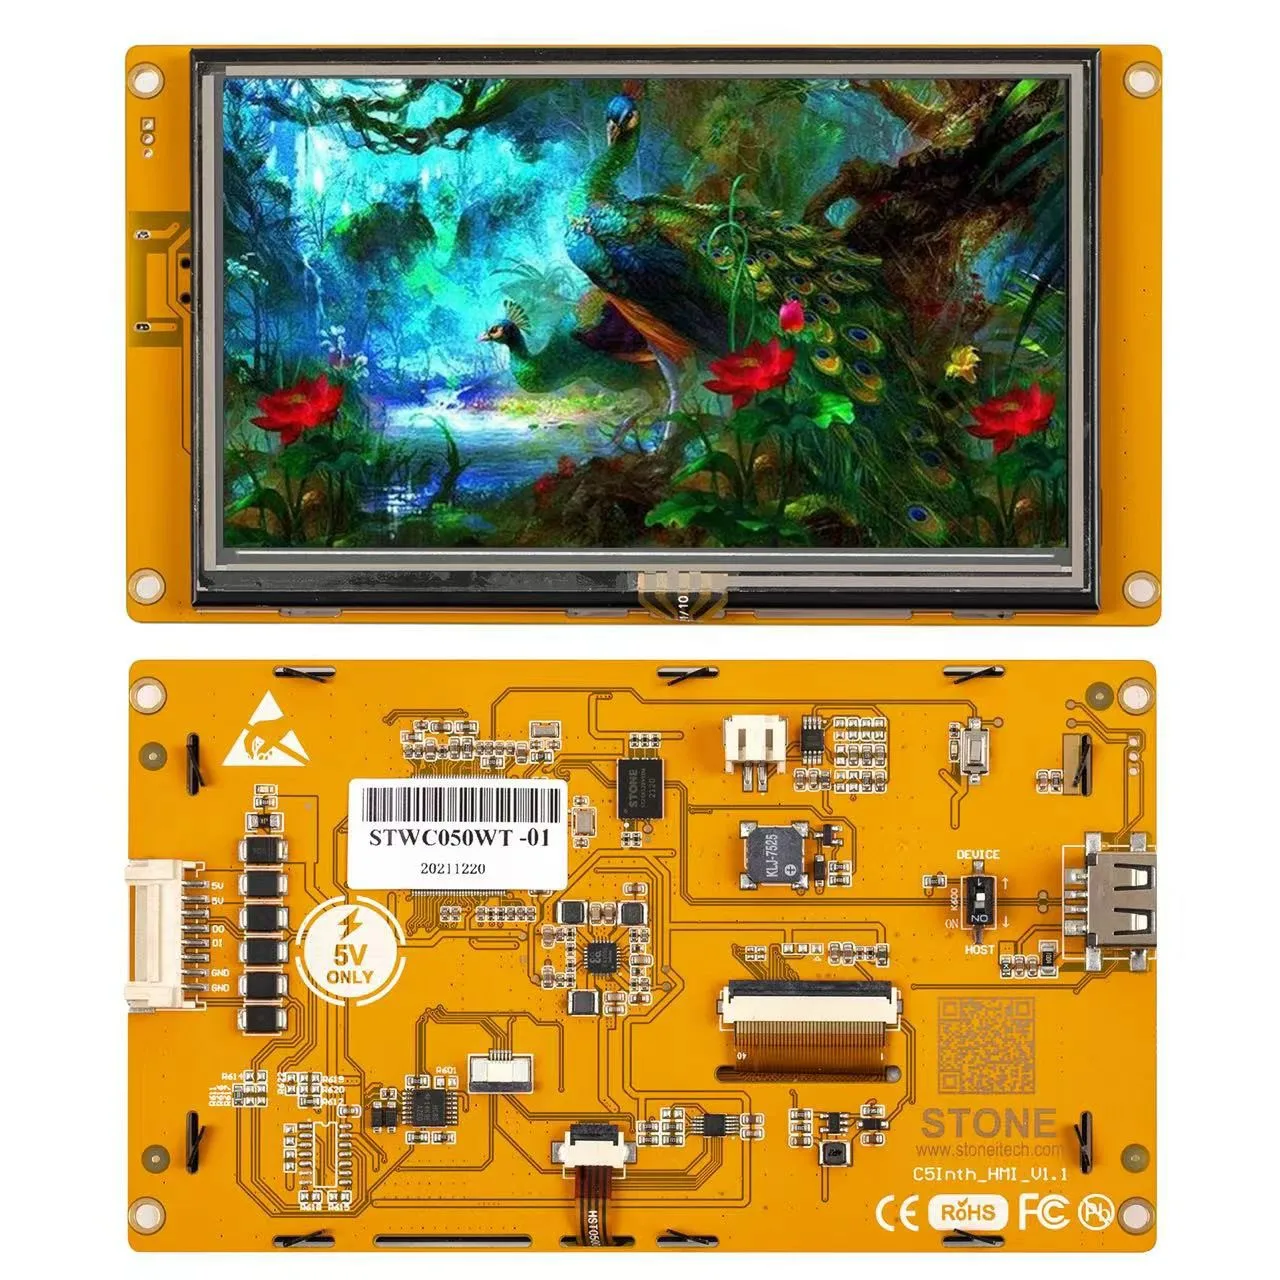 5 Full-color HMI Intelligent LCD Resistive Touch Display Module Easy To Operate For Berate For Basic Programmers STWC070LT-01y